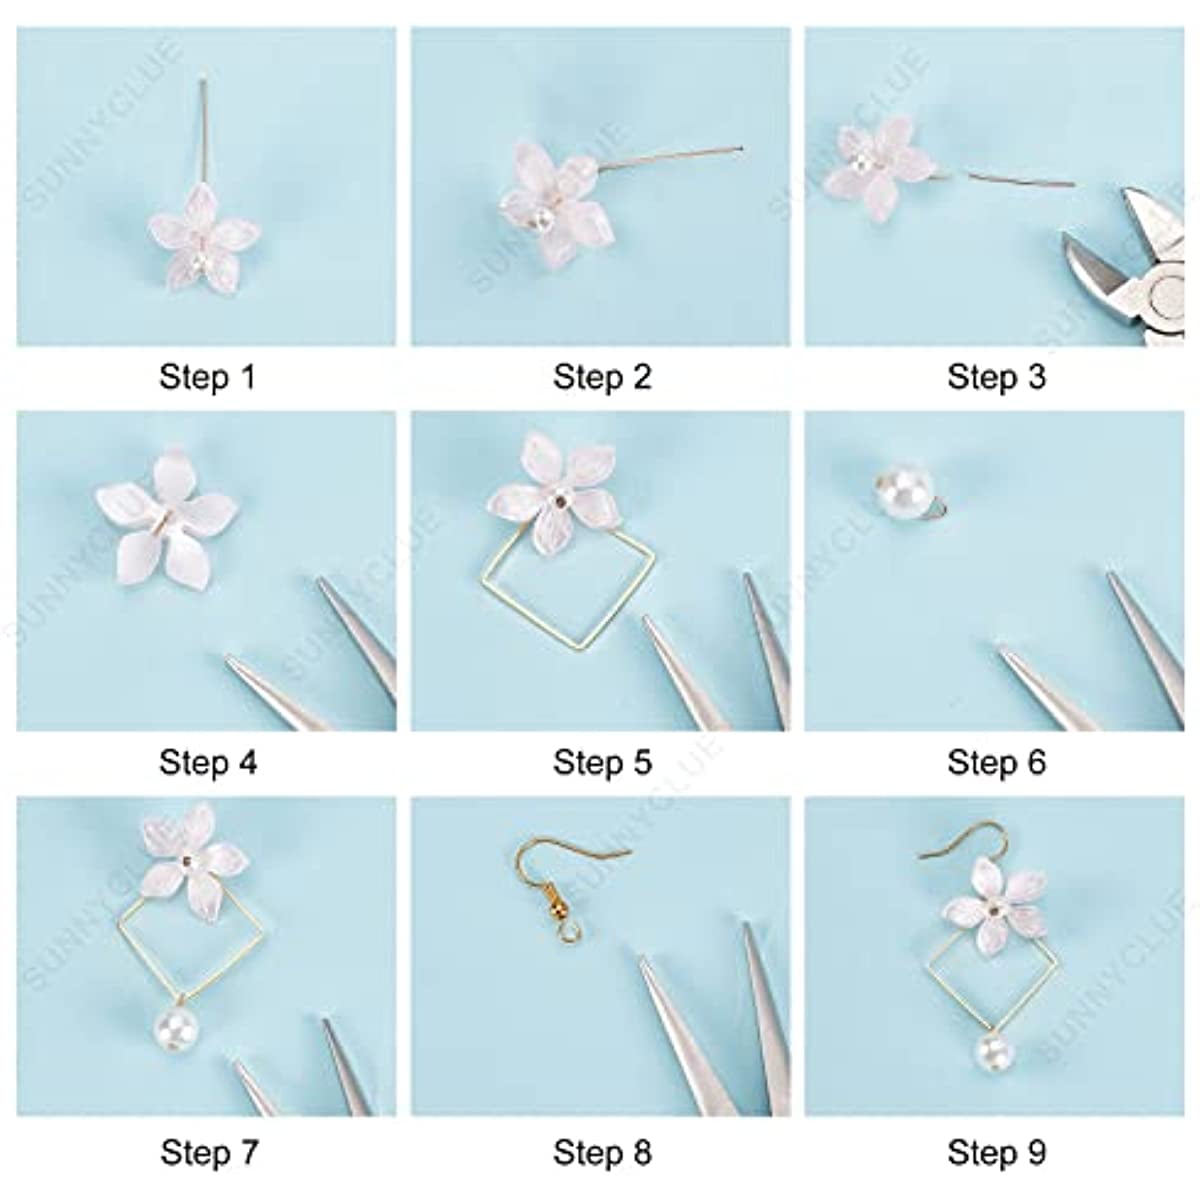 20pcs 13x11mm DIY Flower Charms For Jewelry Making Tiny Flower Charms Small  Flowers Charms